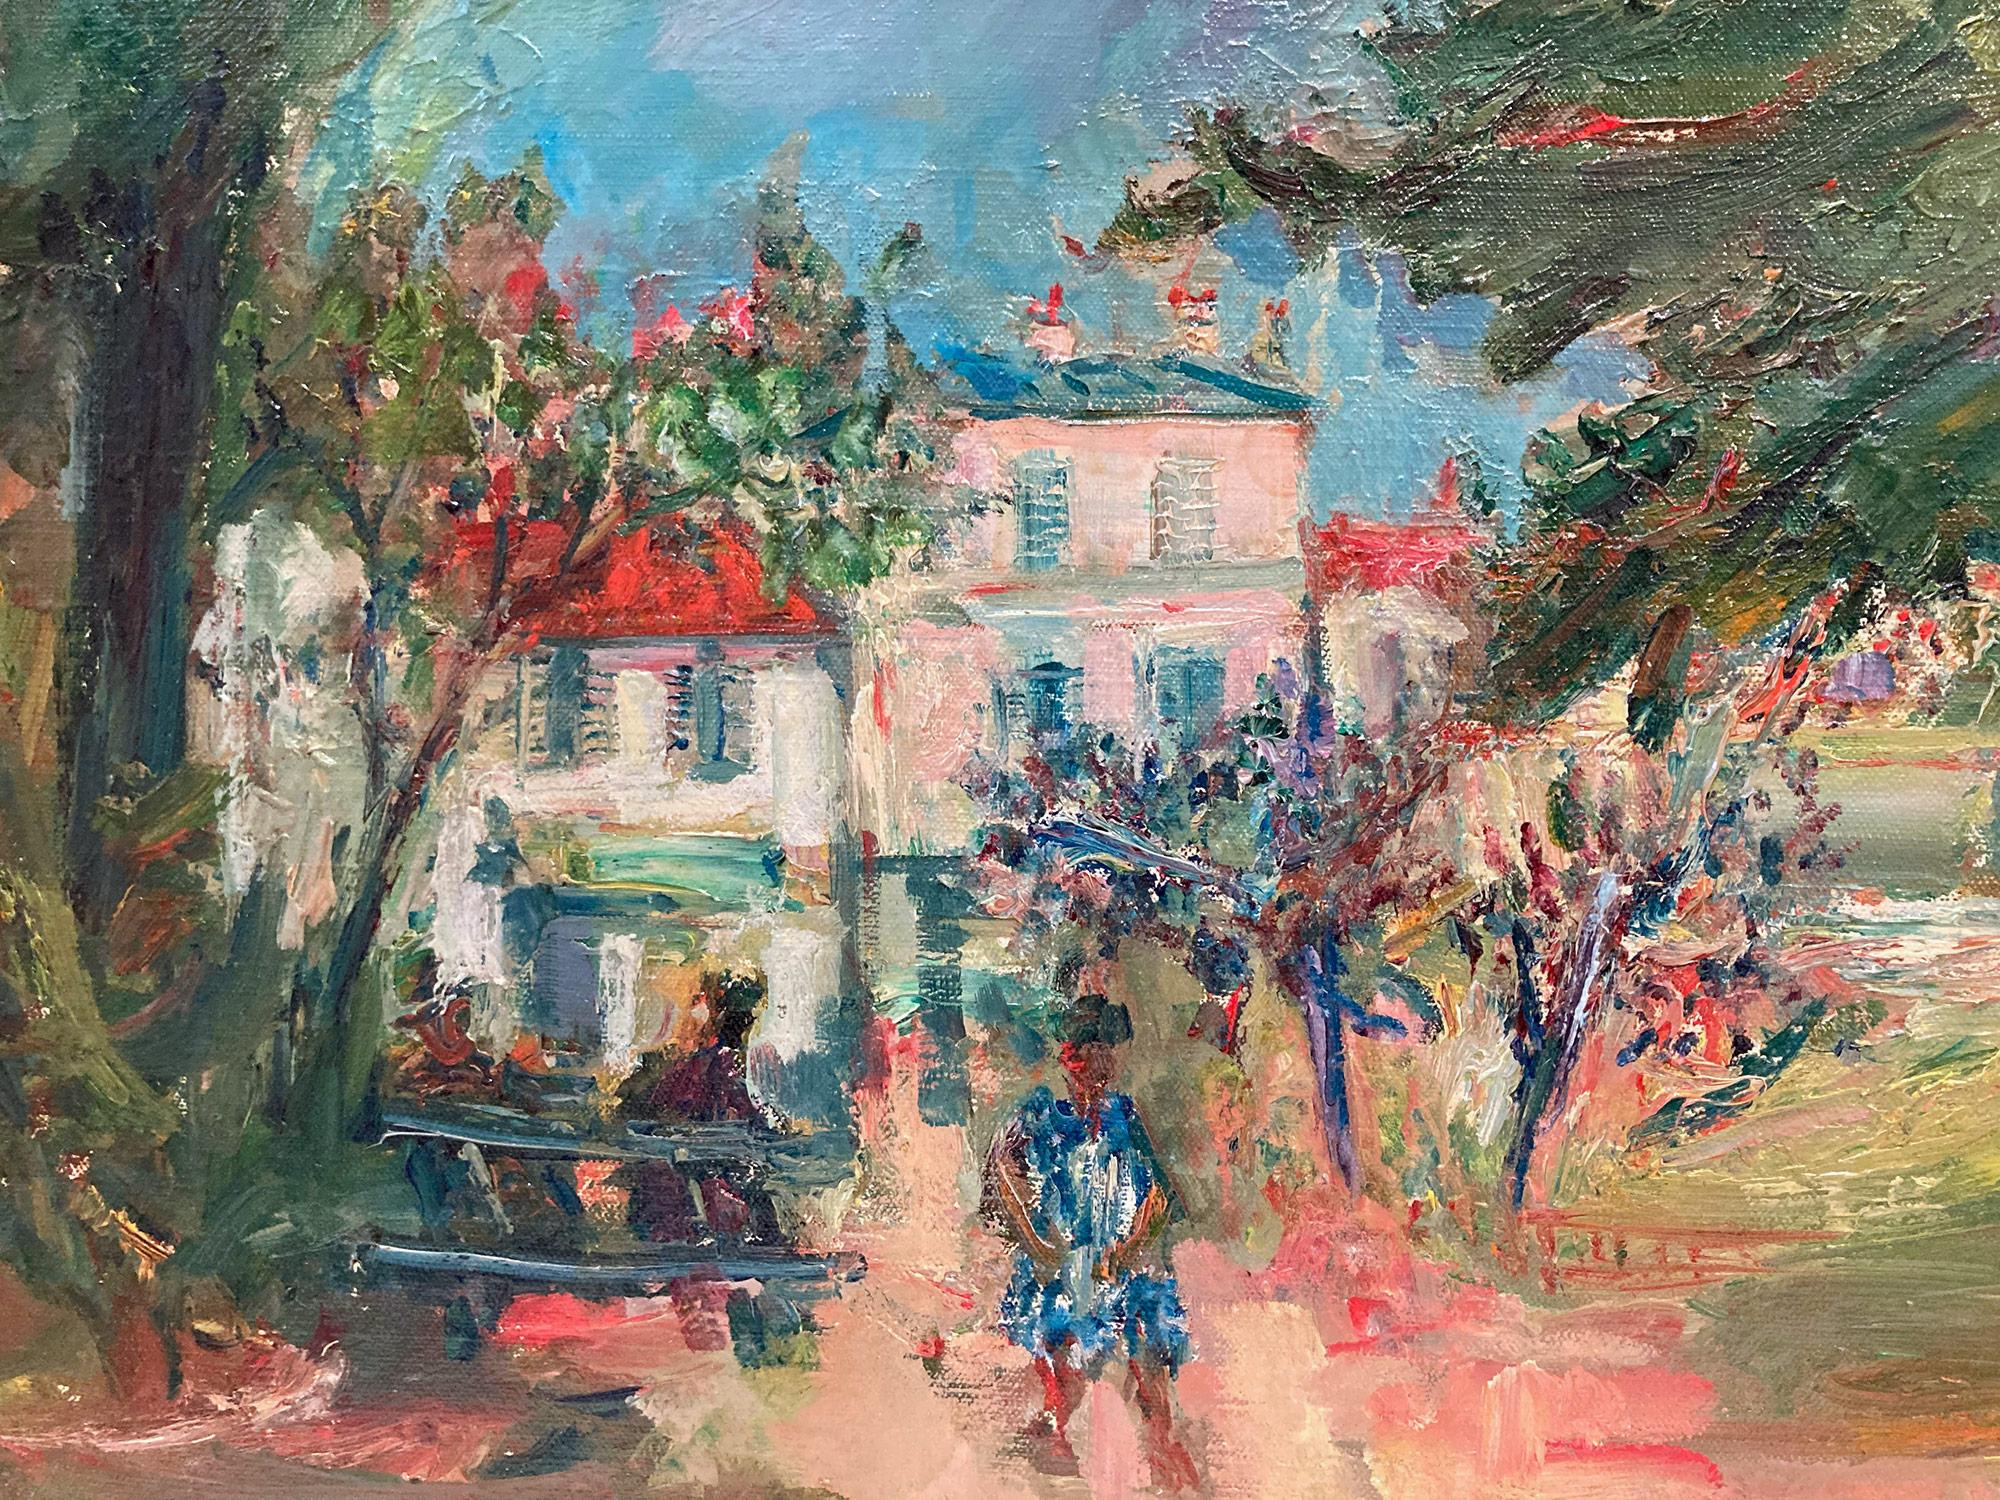 A charming depiction of figures seated on a bench by the village in a Parisian setting. The colors are breathtaking, as the impressionistic details are noted with thicker use of paint. The composition is wonderful, as each figure is captured in